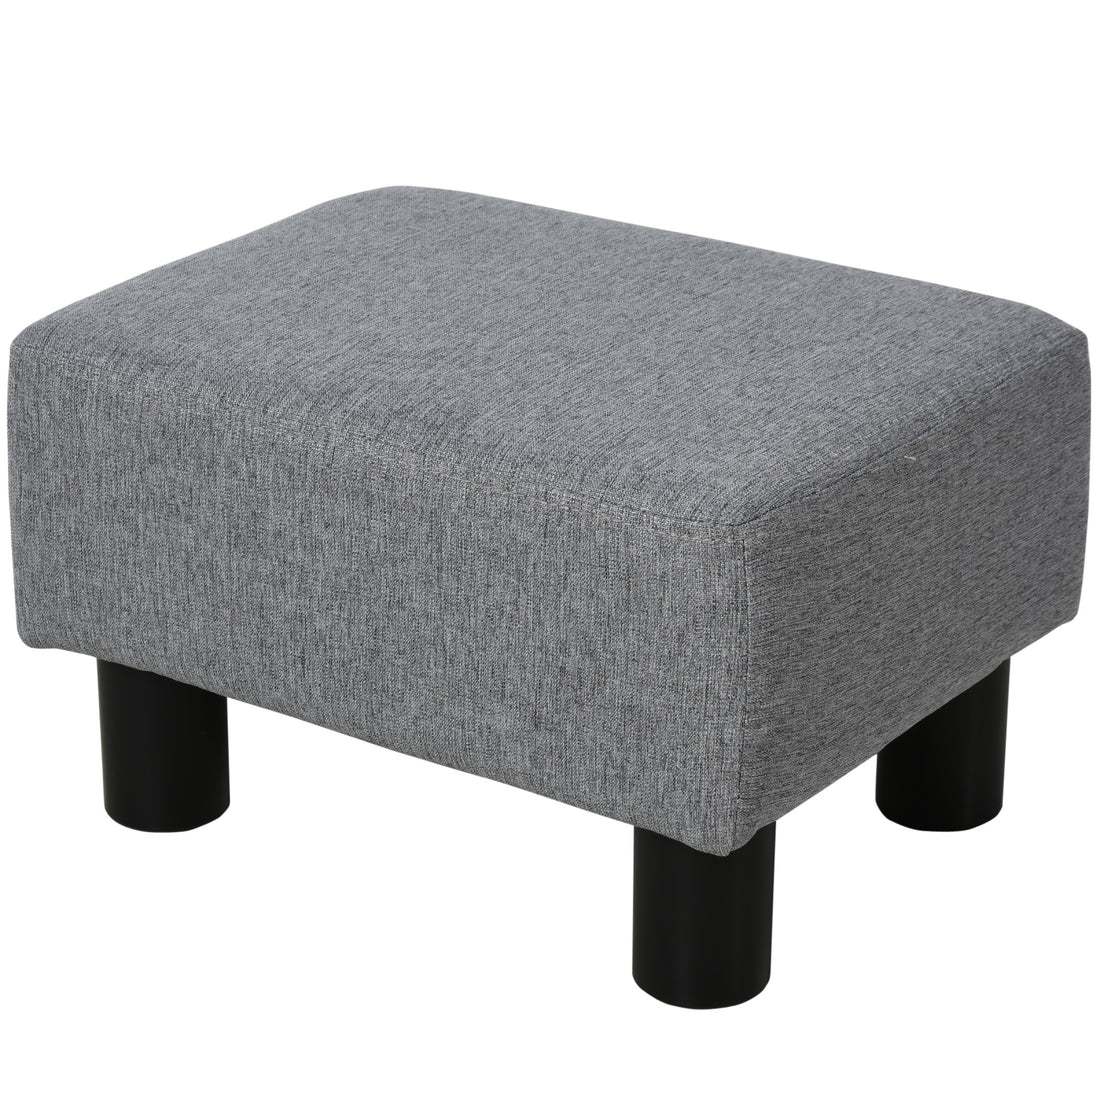 Ottoman Foot Rest, Small Foot Stool With Linen